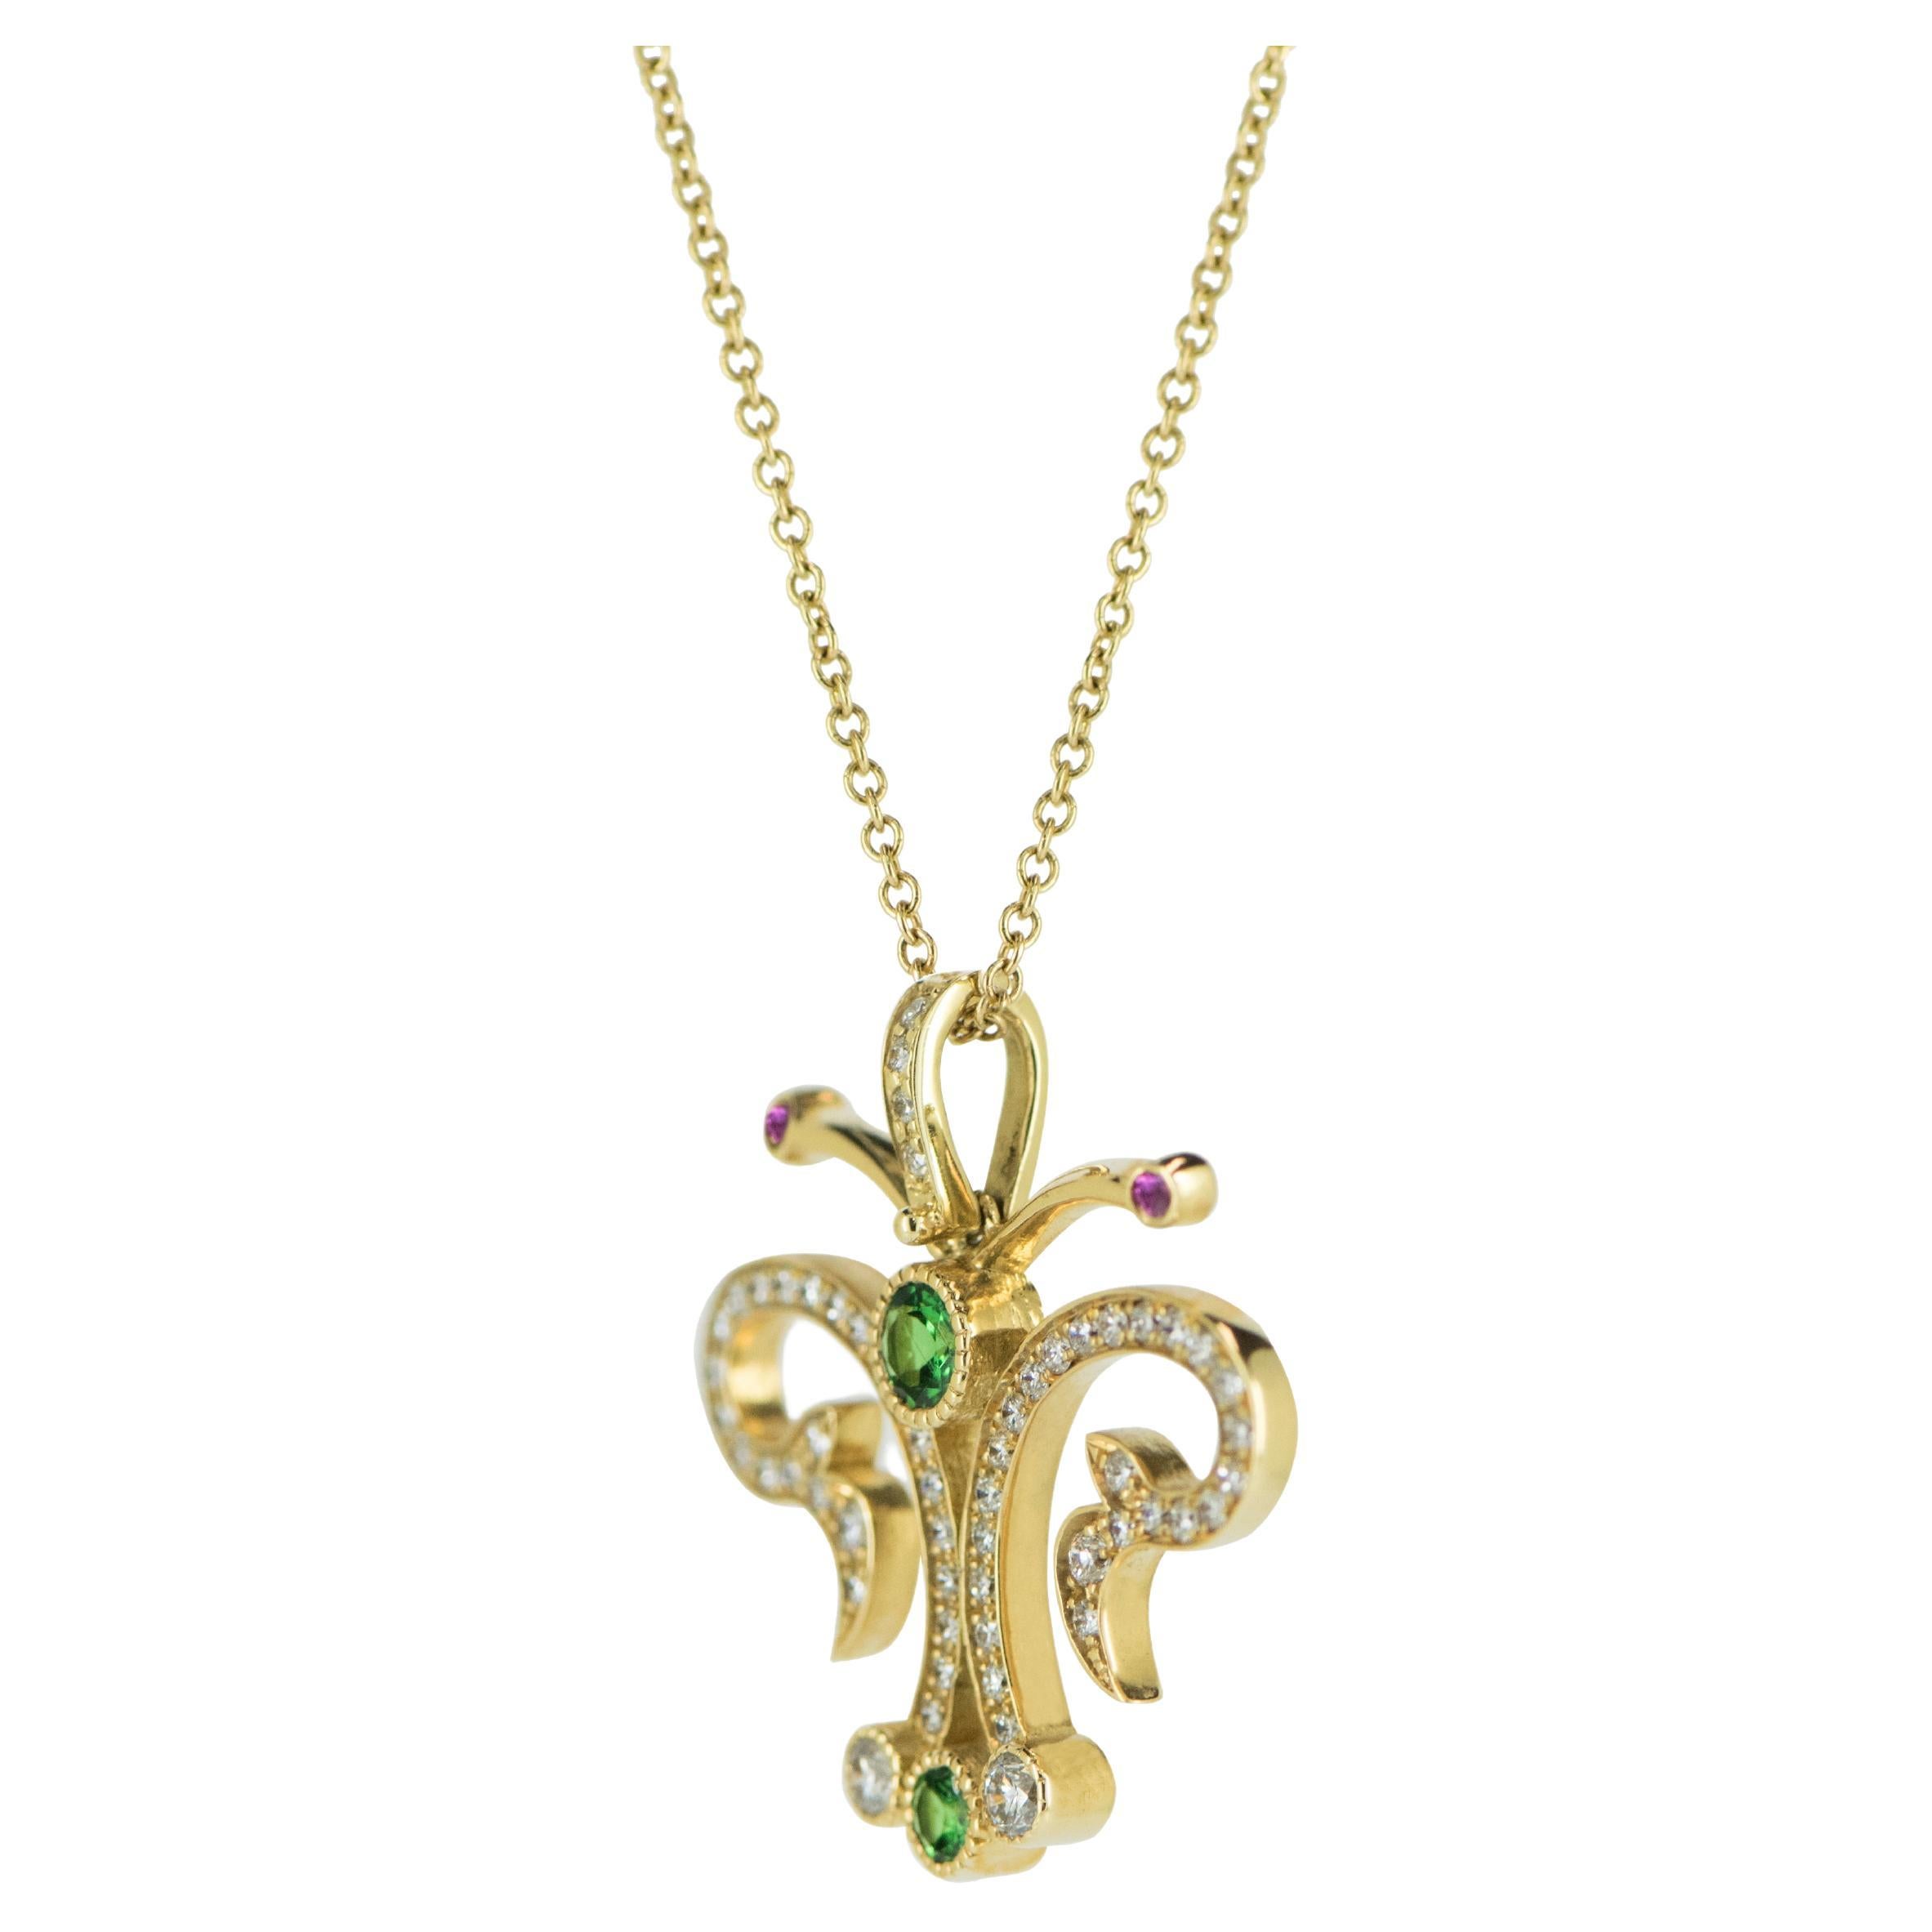 This 18 Karat Yellow Gold Tsavorite Butterfly Diamond Pendant is a mesmerizing piece of jewelry that will captivate any onlooker. The pendant features .90ct of sparkling diamonds, .87ct of vivid Tsavorite Garnets, and a touch of rubies, all expertly